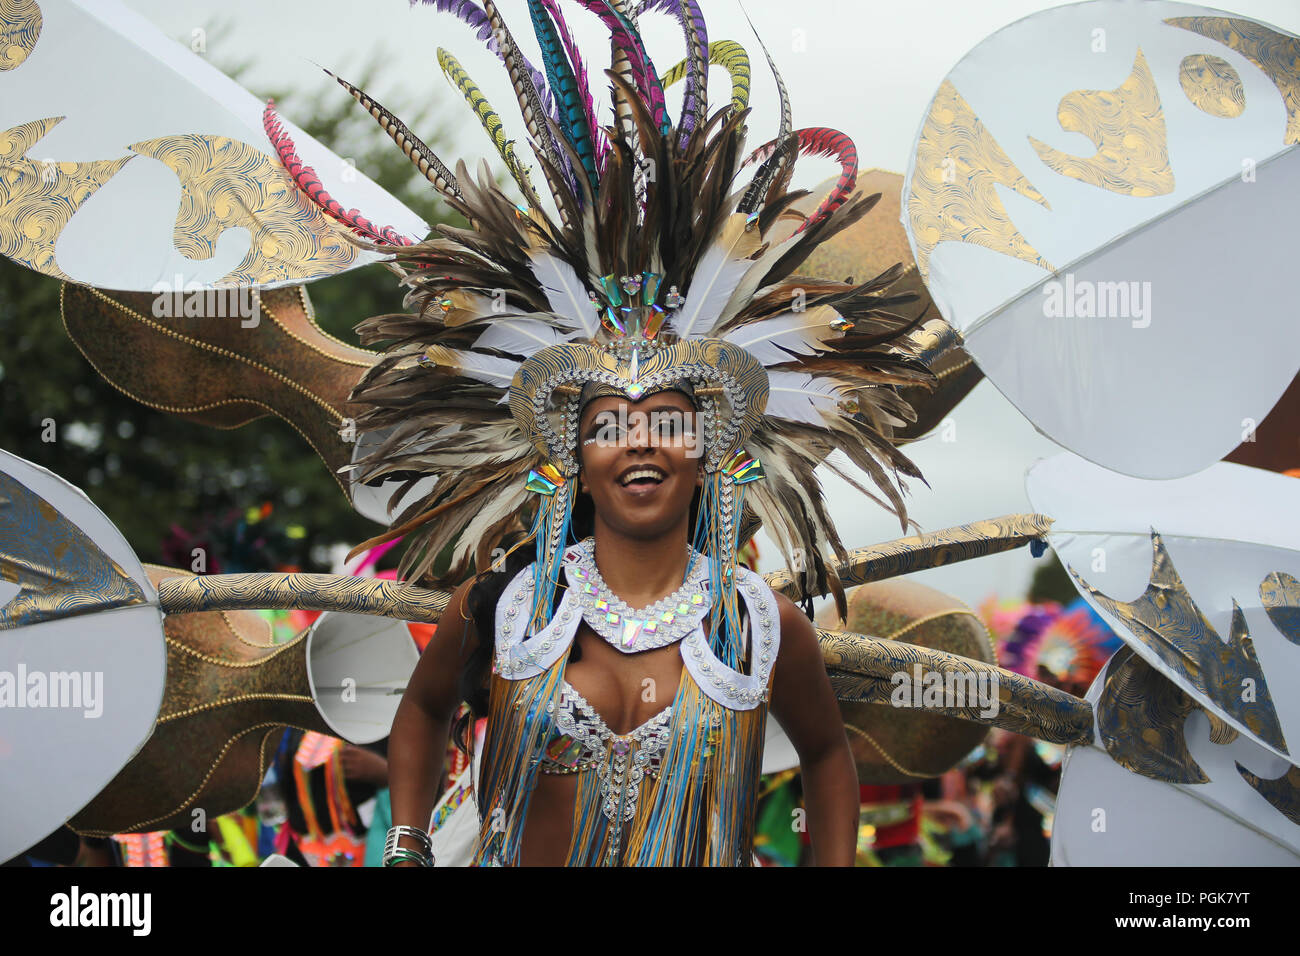 Potternewton Park, Leeds, West Yorkshire, 27th August 2018.   Performers participate in the Leeds West Indian Carnival 2018 in Leeds, UK, on Aug. 27th, 2018. The Leeds West Indian Carnival, is celebrating is 51th year in the city of Leeds. The carnival was originated in 1967 by Arthur France as a way for Afro-Caribbean communities to celebrate their own cultures and traditions, and is one of the biggest West Indian carnivals outside of London.   Credit: Stephen Gaunt/Touchlinepics.com/Alamy Live News Stock Photo